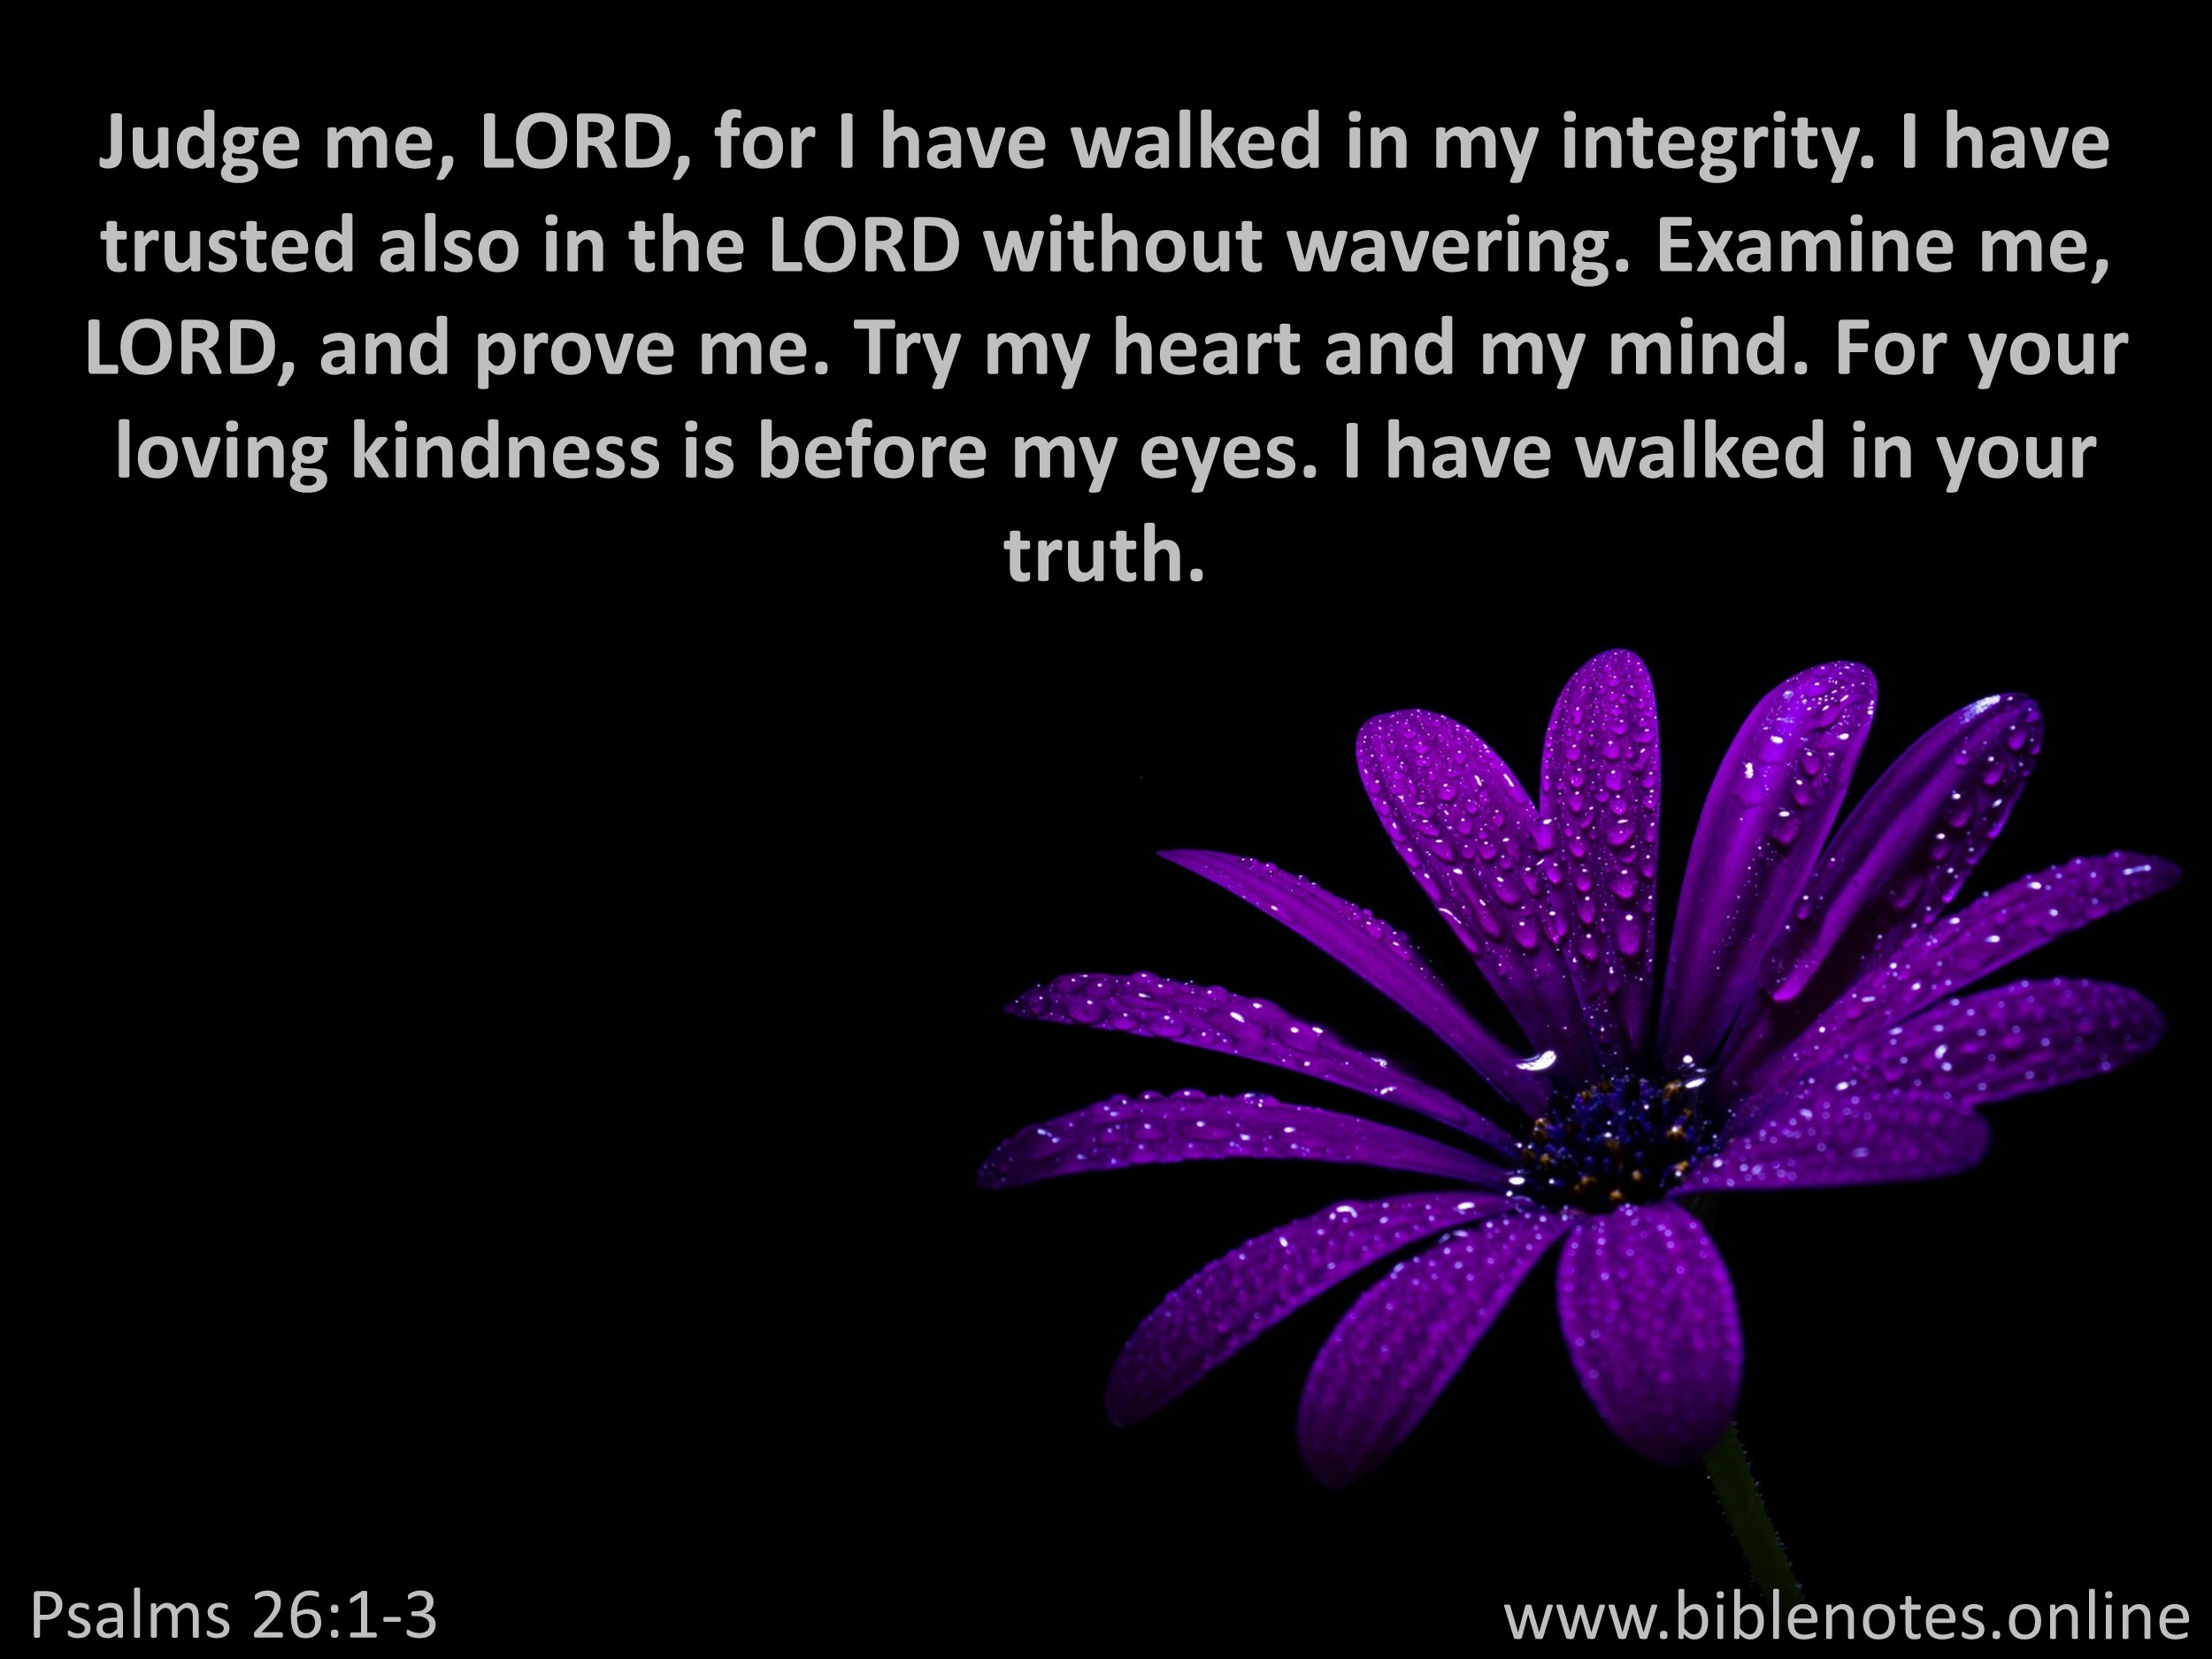 Bible Verse from Psalms Chapter 26